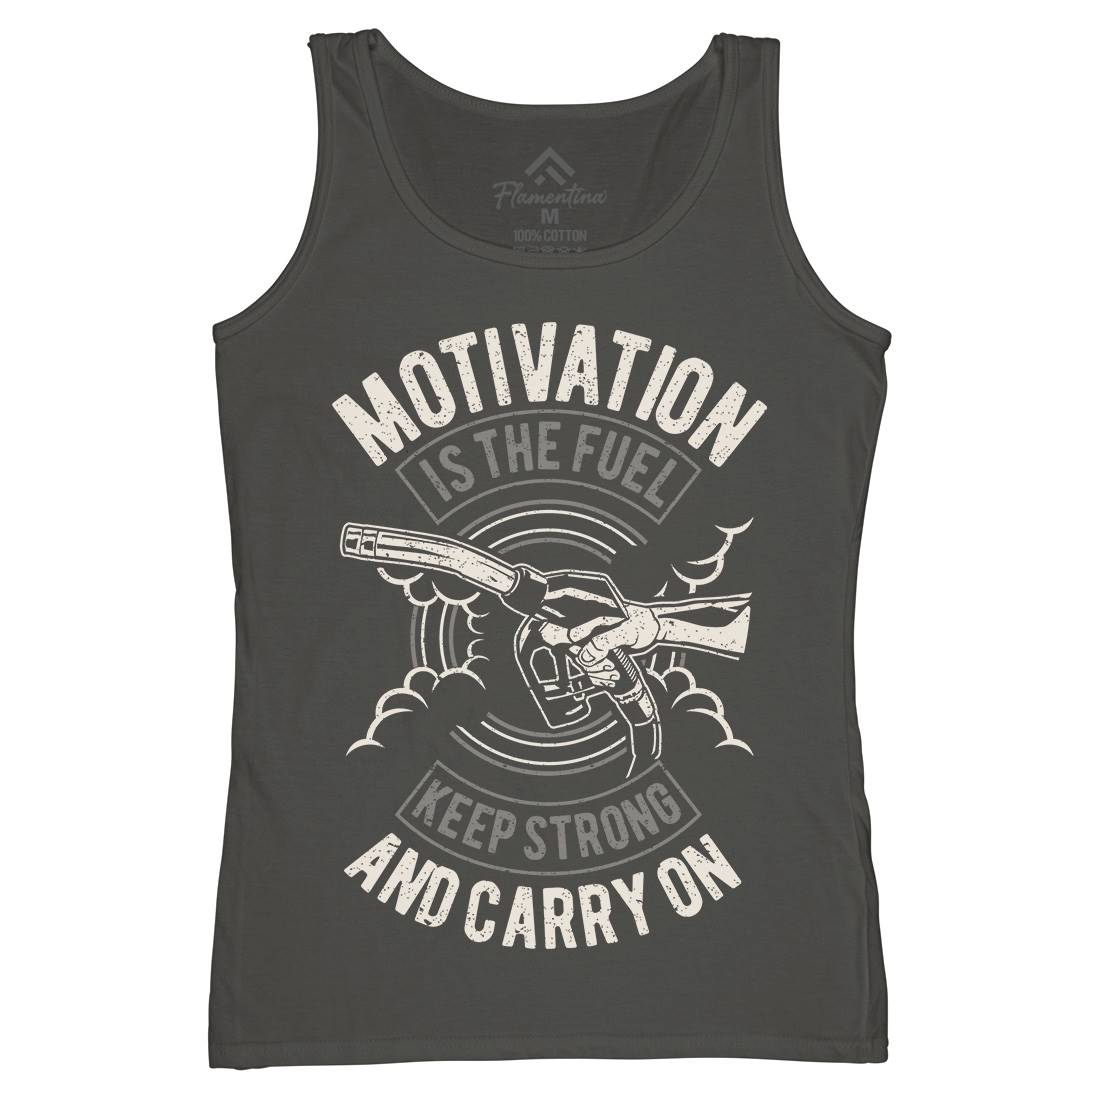 Motivation Is The Fuel Womens Organic Tank Top Vest Gym A717